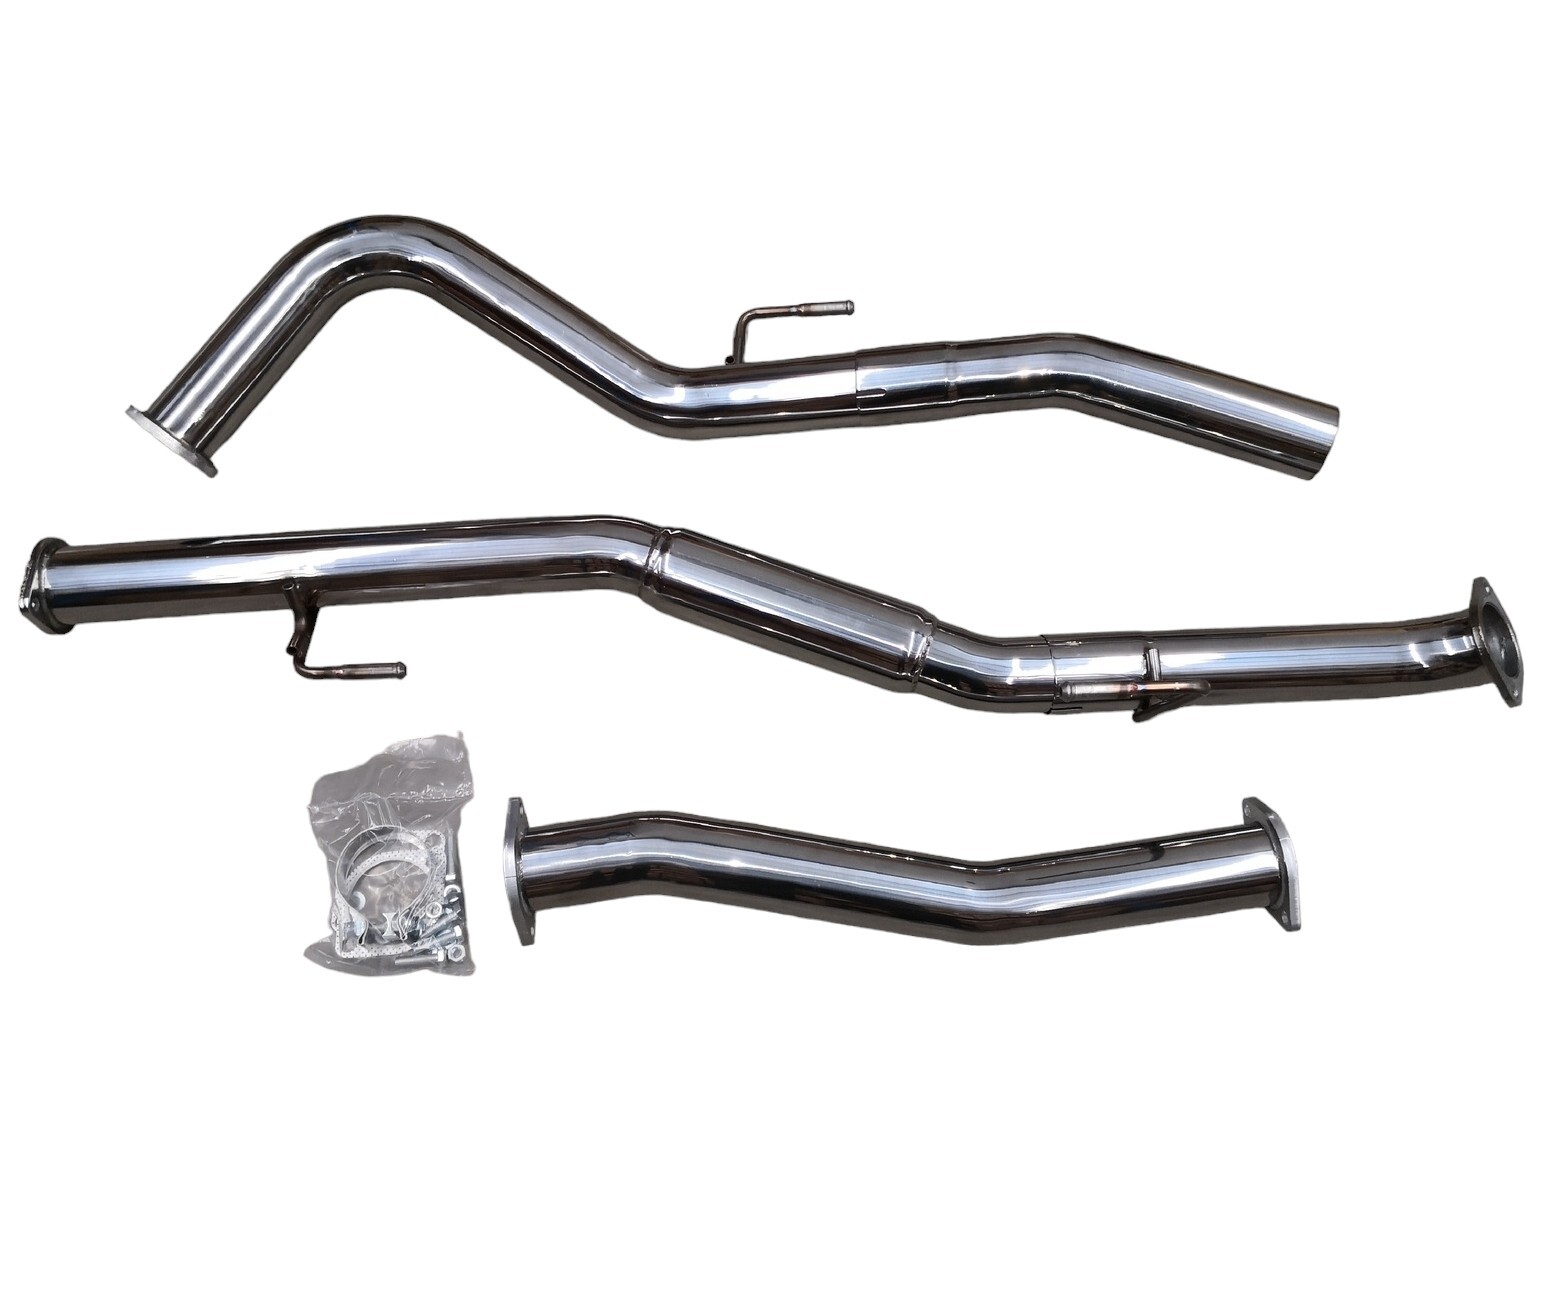 NISSAN NAVARA NP300 D23 DPF BACK EXHAUST STAINLESS